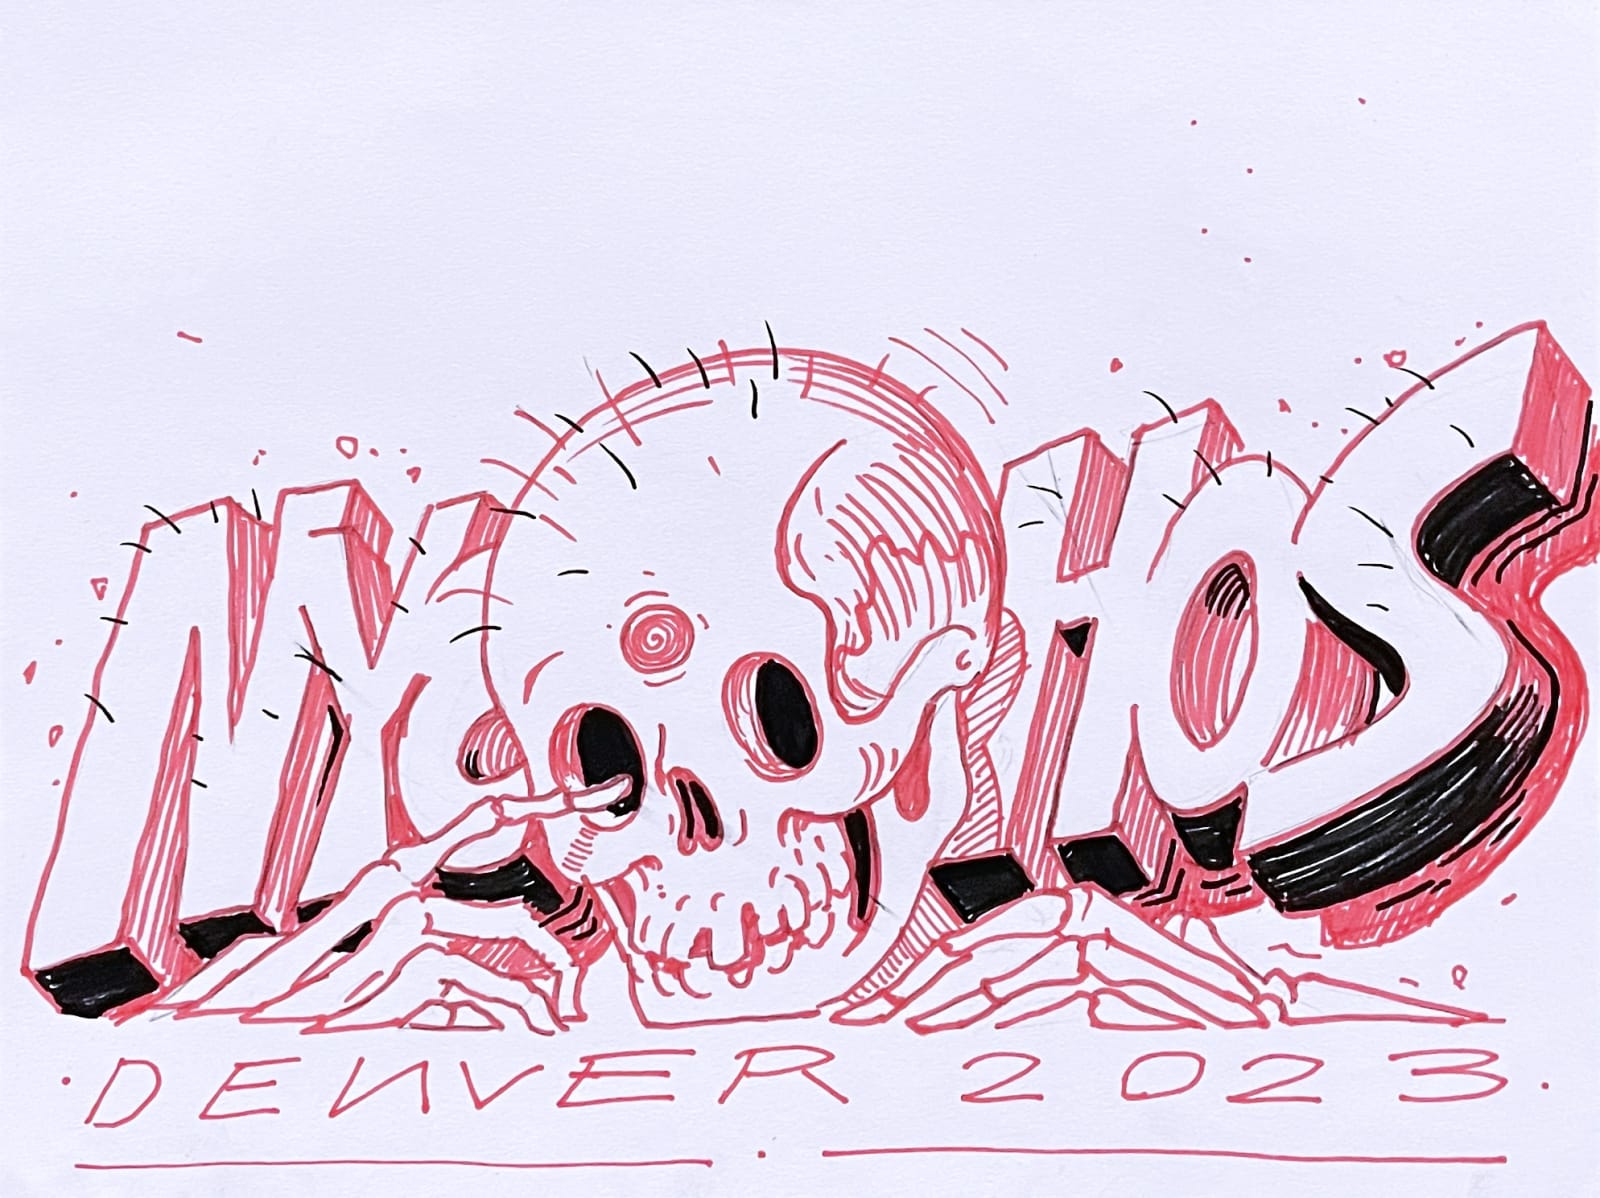 NYCHOS, I See You When You Get There